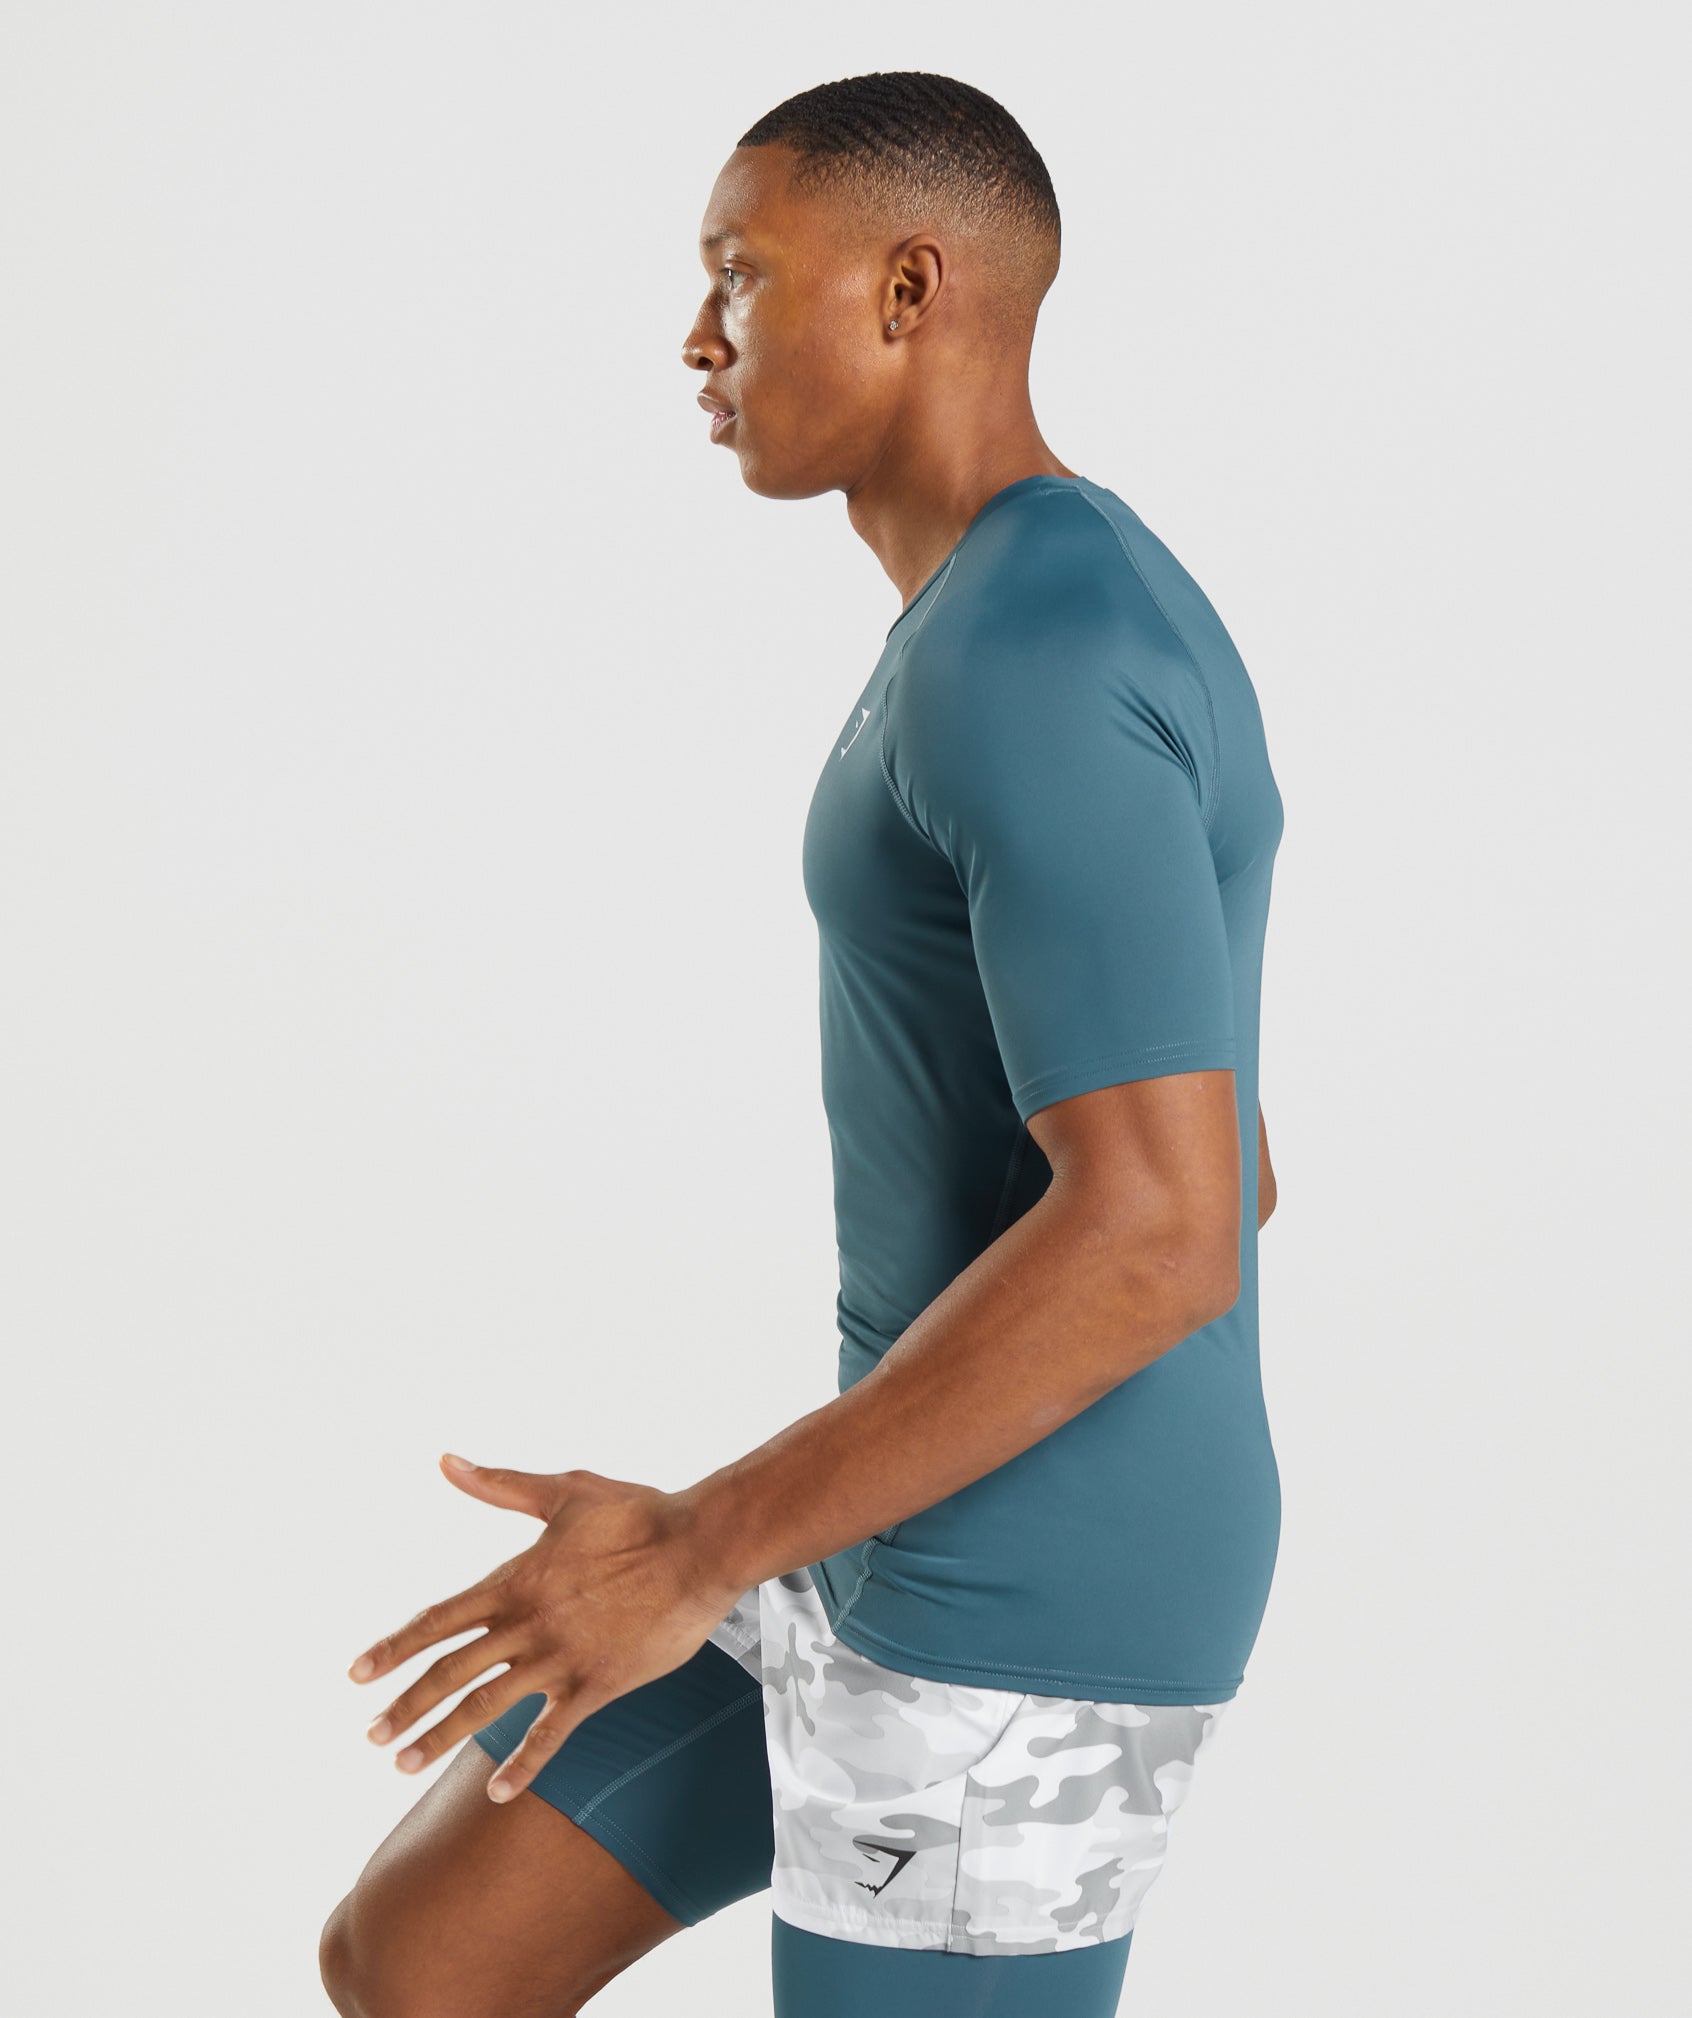 Element Baselayer T-Shirt in Tuscan Teal - view 3